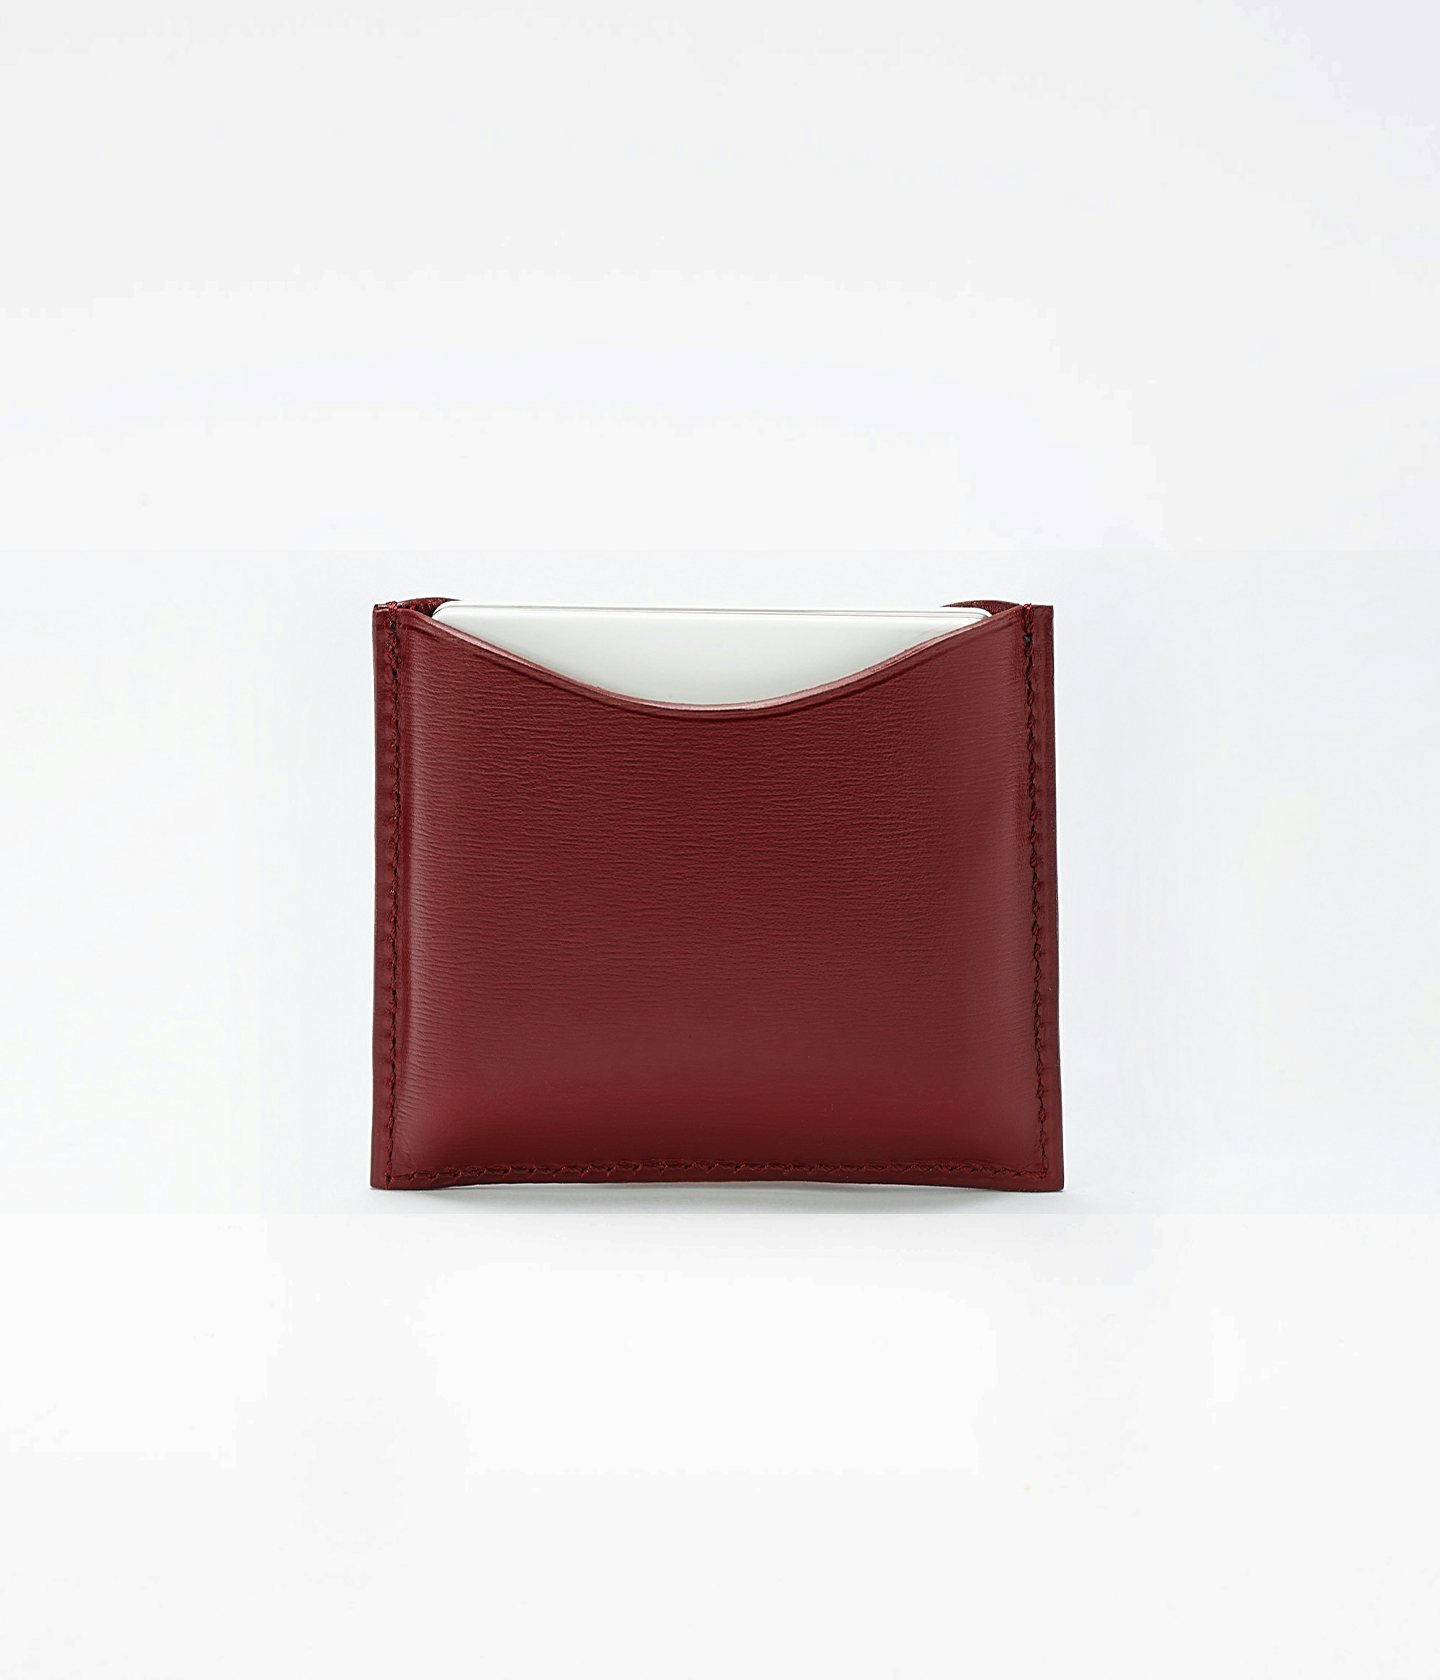 La bouche rouge upcycled fine leather compact case in Chocolate